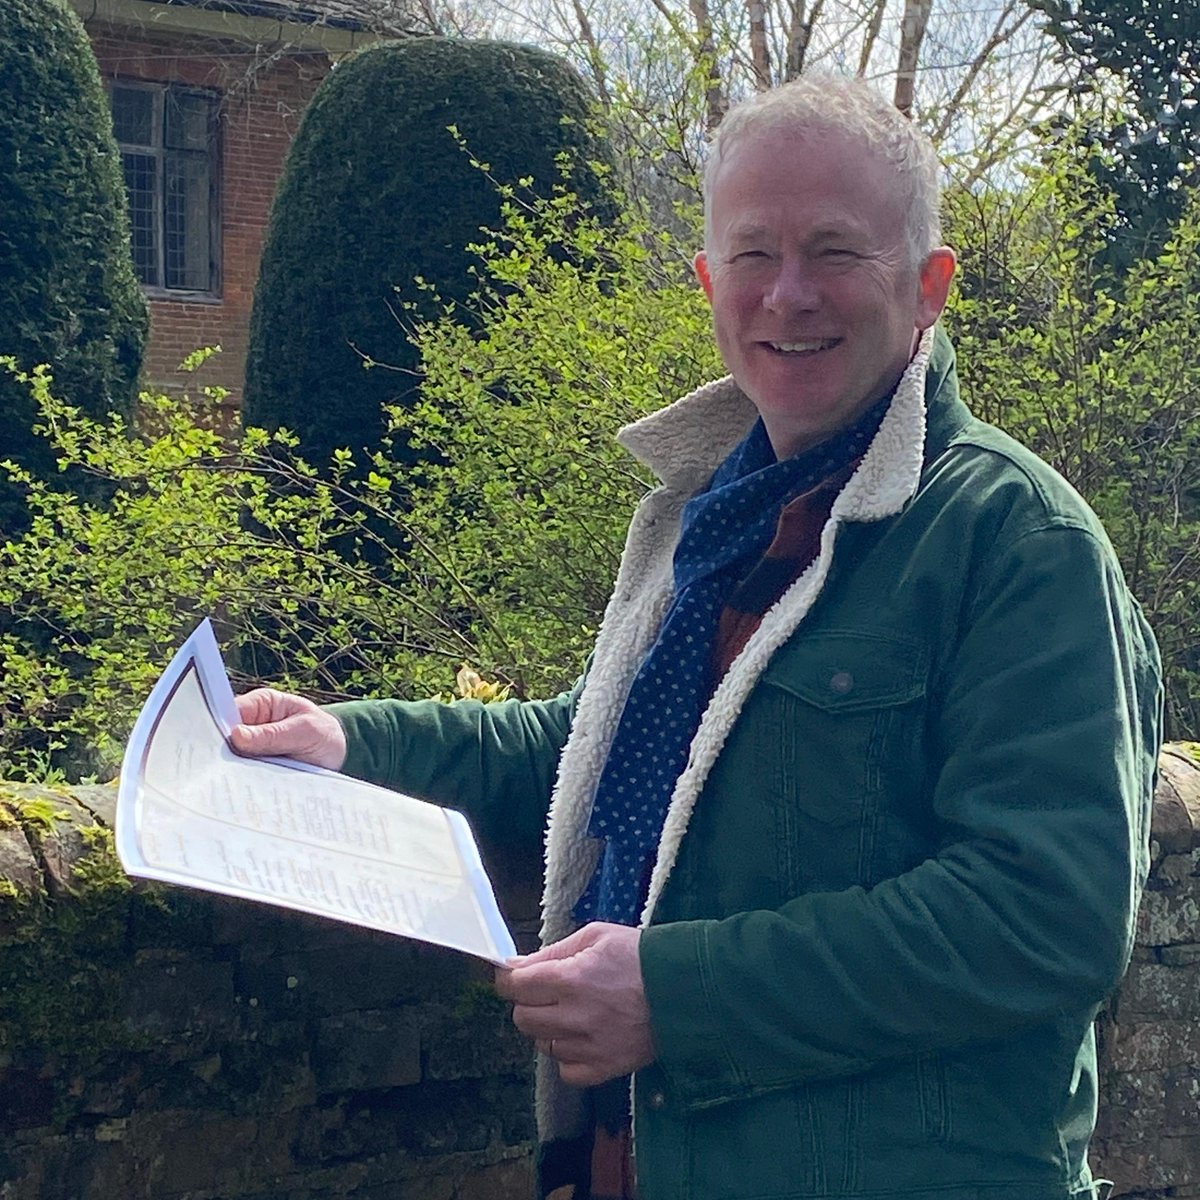 We've got a special treat coming your way this Friday when @TobyBuckland visits the beautiful Vann garden in Surrey. 8pm @BBCTwo is the place to be. We look forward to seeing you then 🙂 #GardenersWorld #FlowersOnFriday #Gardening